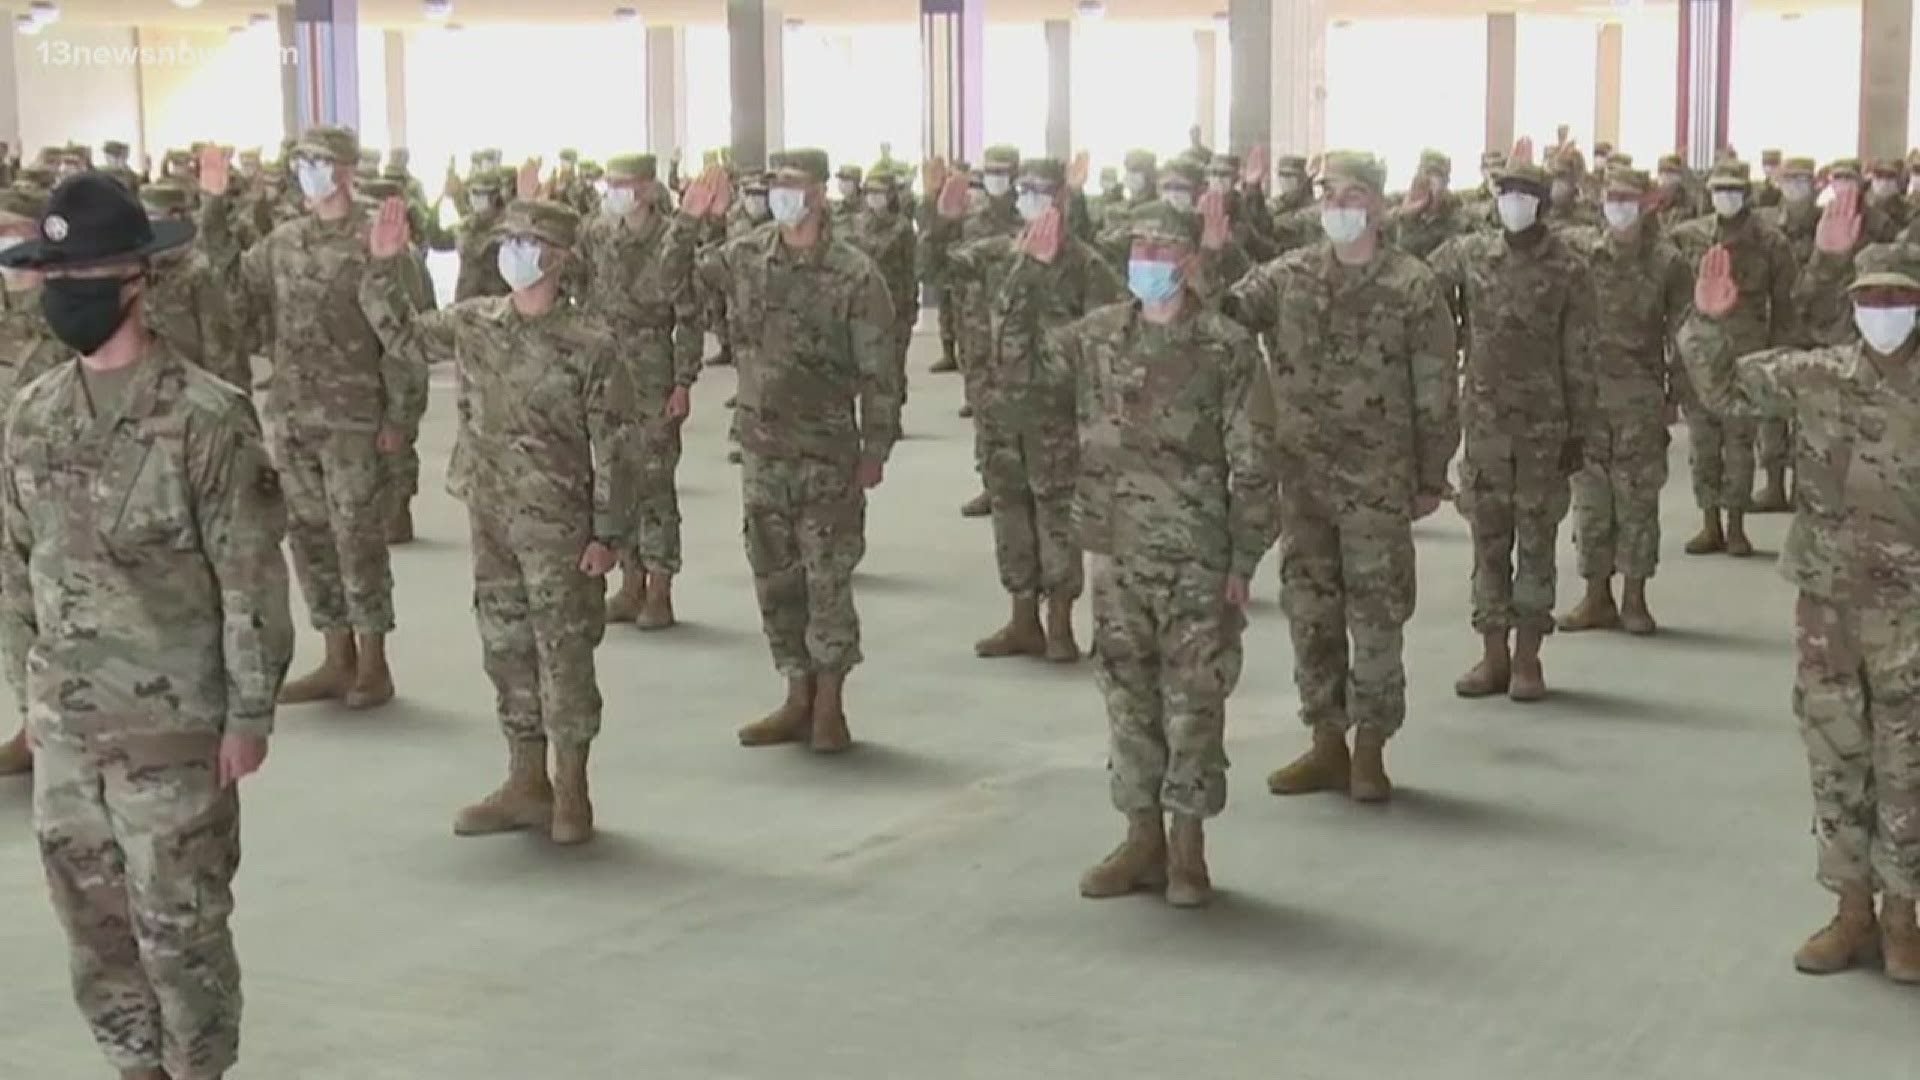 Air Force reduces boot camp time amid pandemic